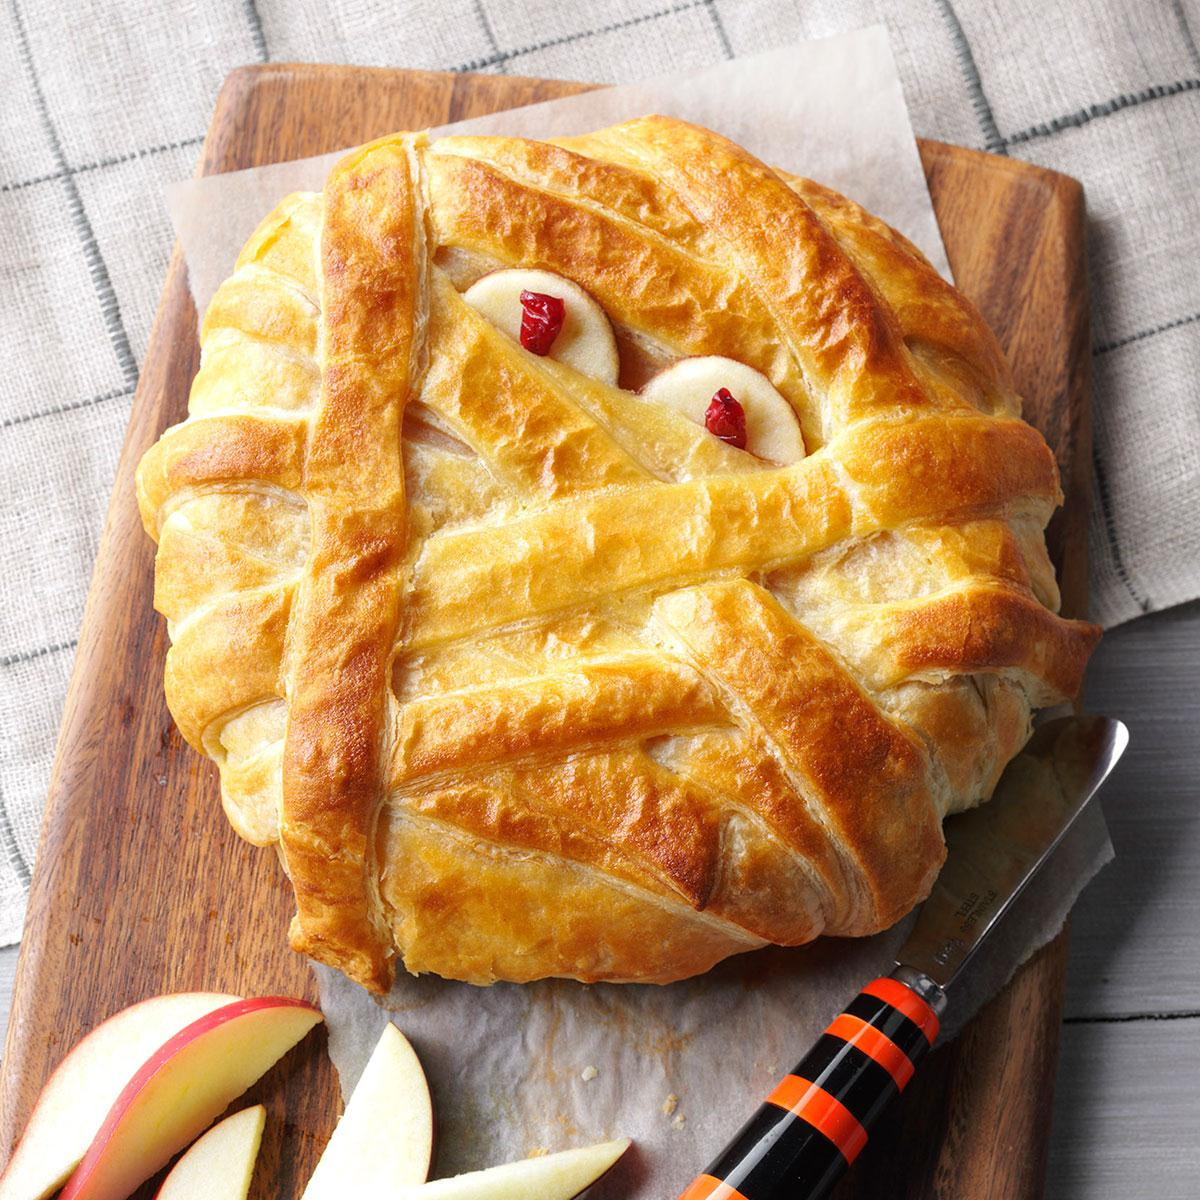 Halloween Main Dishes
 58 Howling Good Potluck Recipes for Your Halloween Party